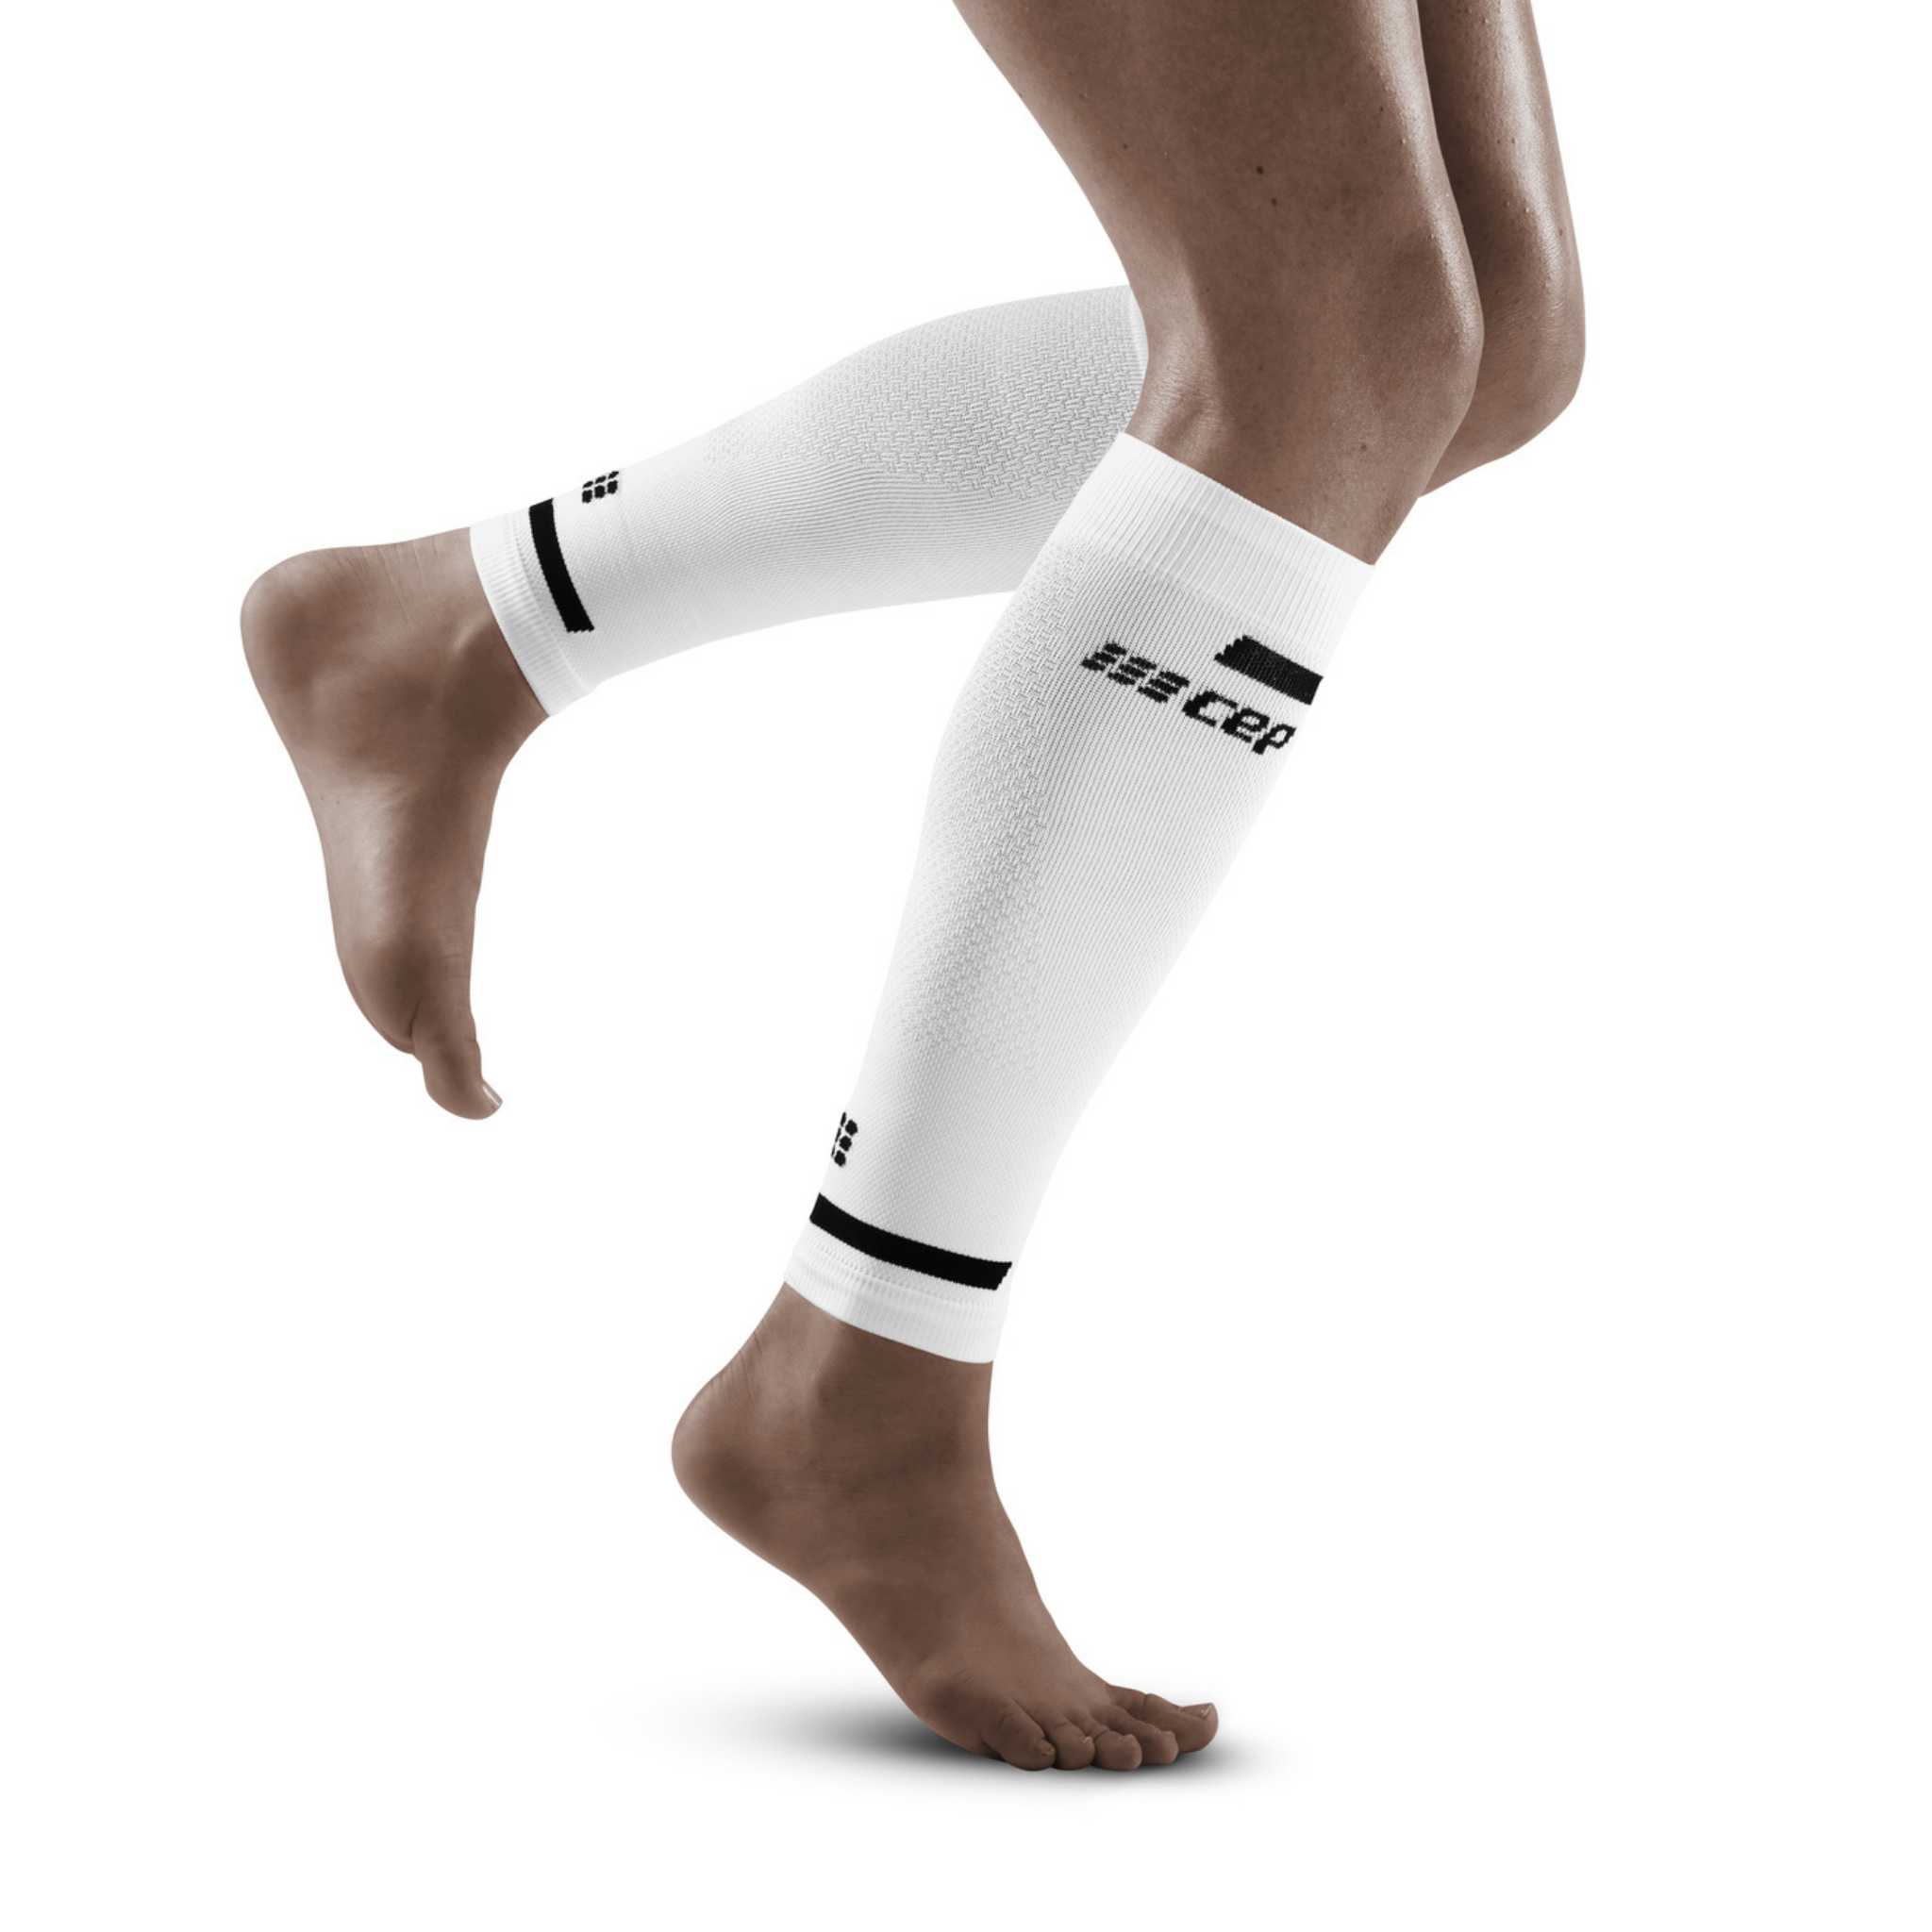 EXCLUZO 1PCS Leg Support Socks Calf Compression Sleeves Leg Compression  Socks for Runners Football Basketball Players Calf Pain Relief Calf Gua  Arch Support ces : : Health & Personal Care